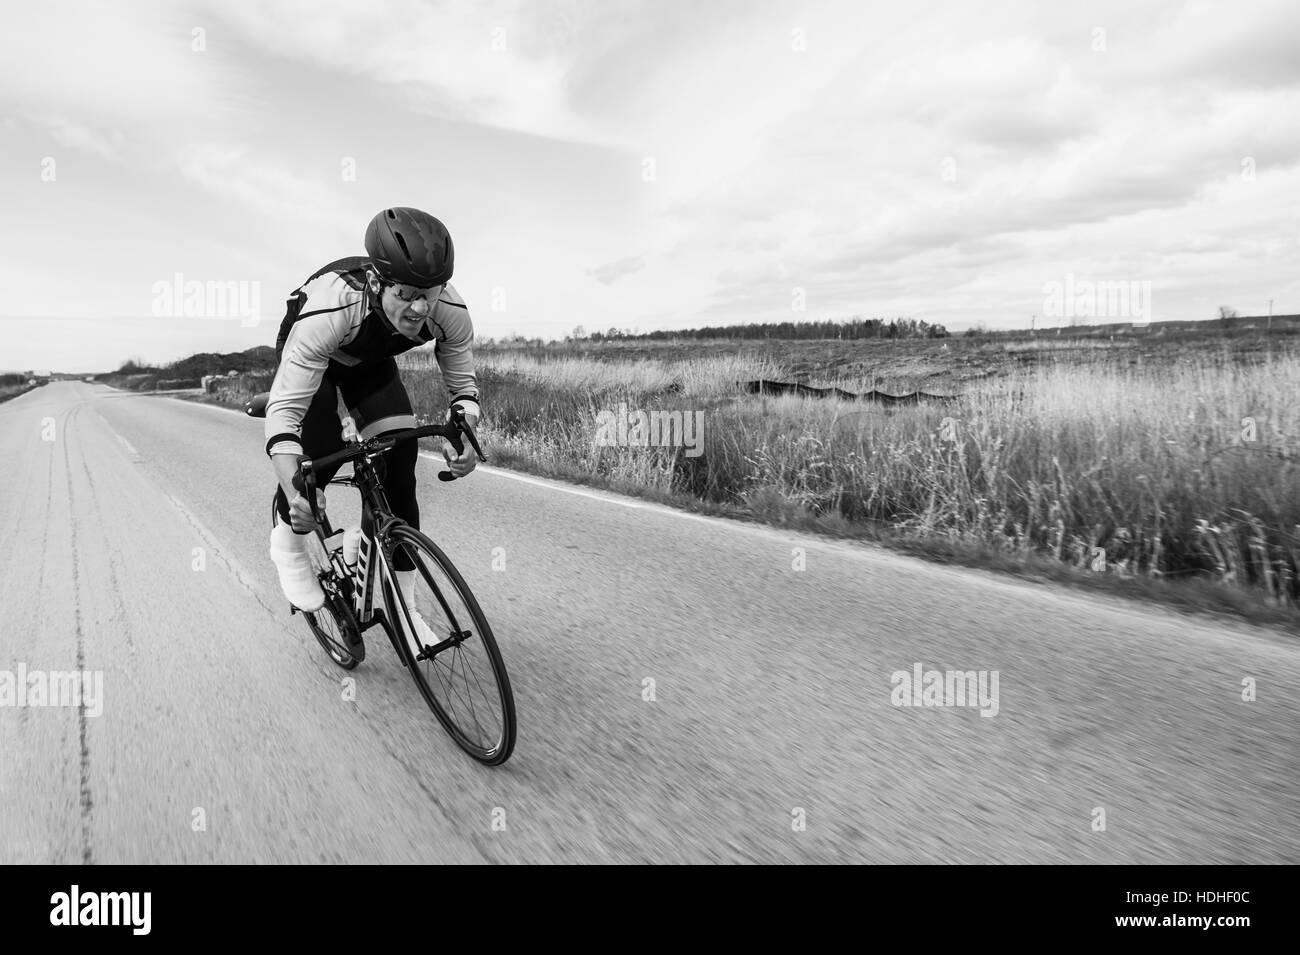 Blurred motion of cyclist riding bicycle on country road by field against sky Stock Photo